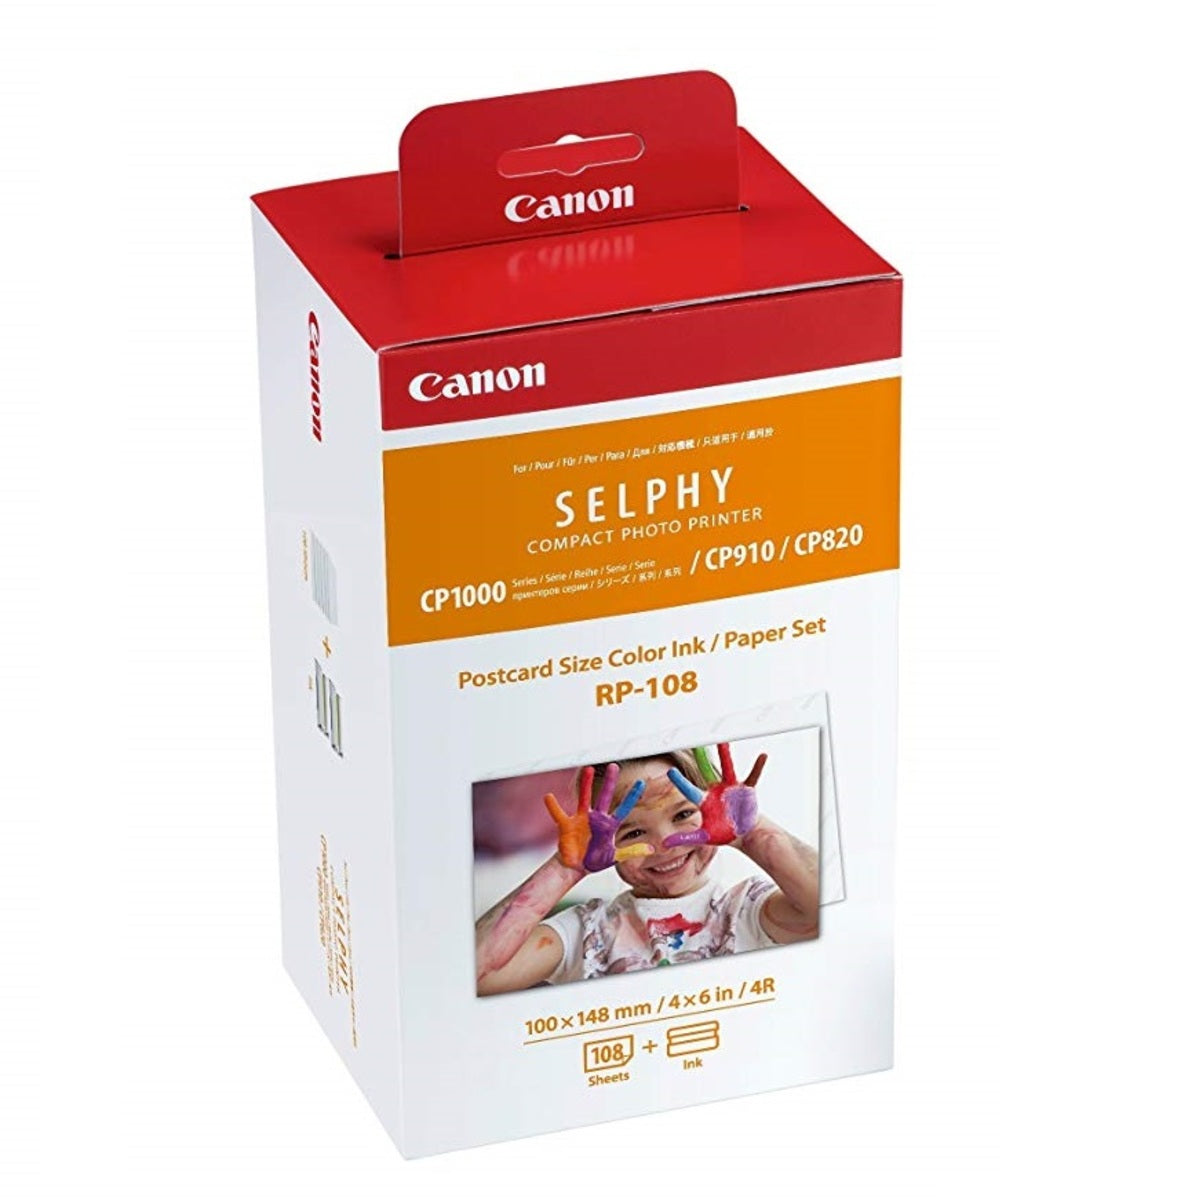 Canon - RP-108 (postcard size) photo paper 108 sheets with ribbon set